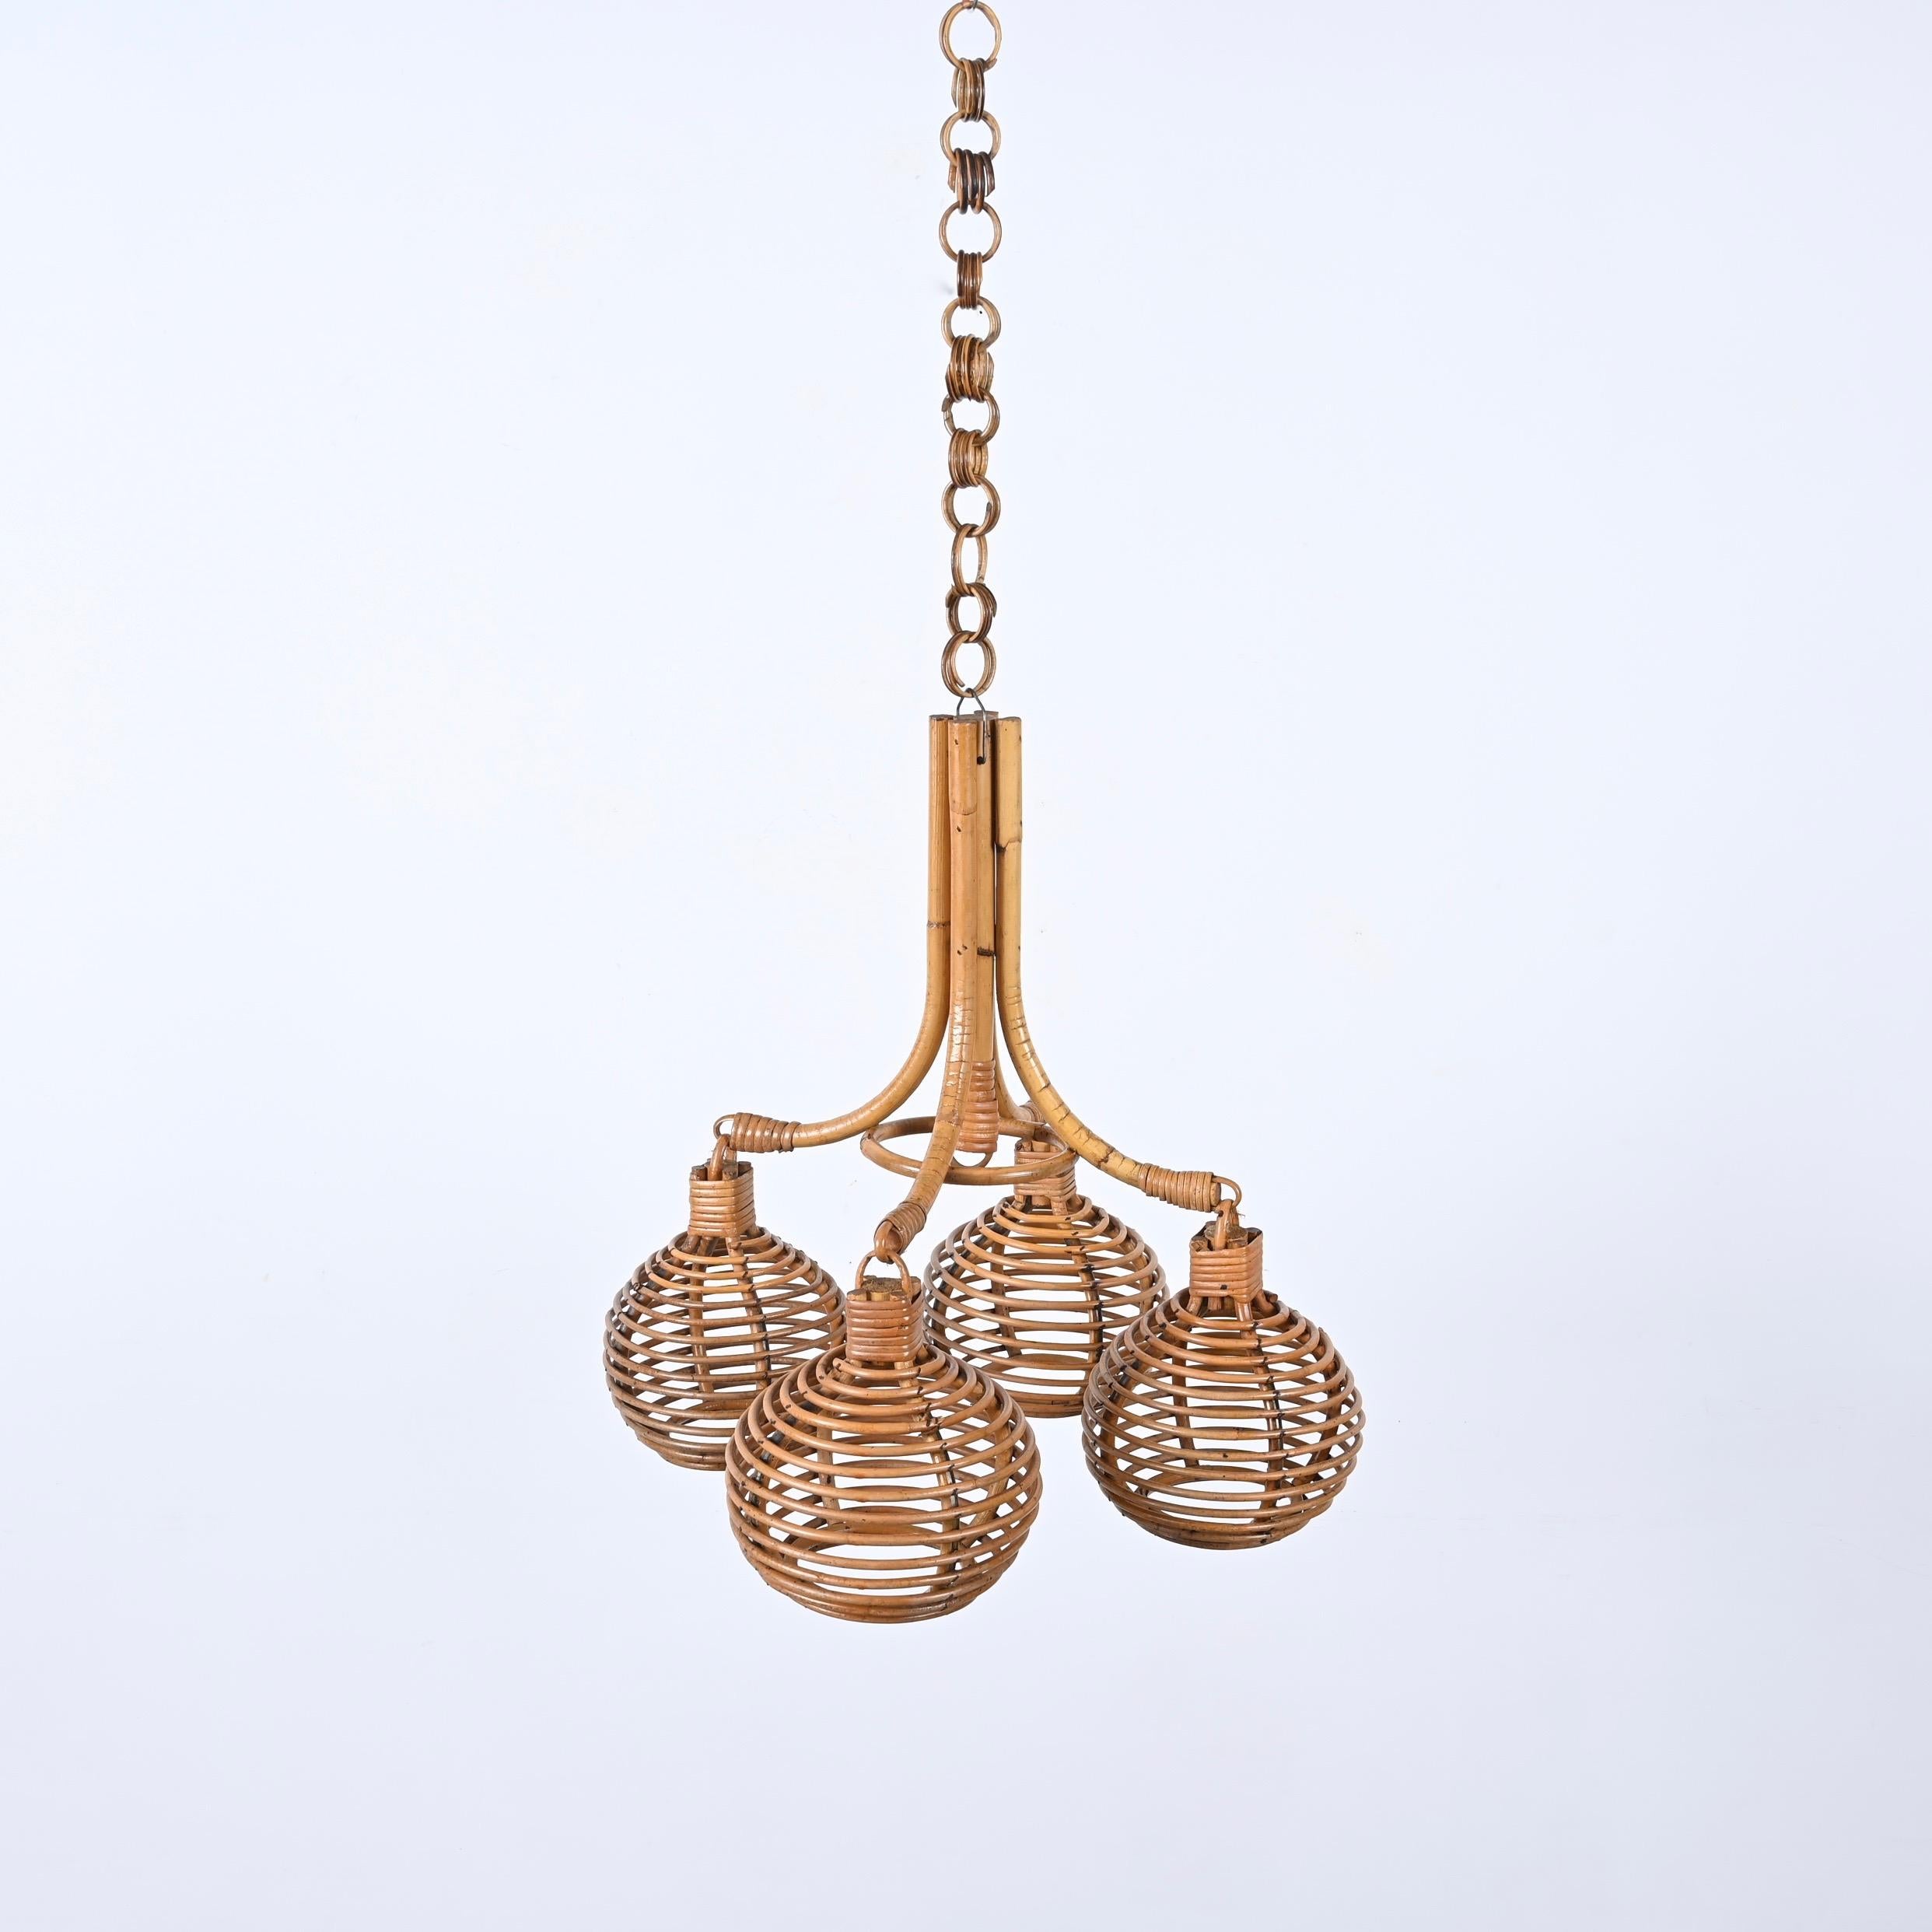 Midcentury French Riviera Bambo and Rattan 4 Sphere Italian Chandelier, 1960s 10